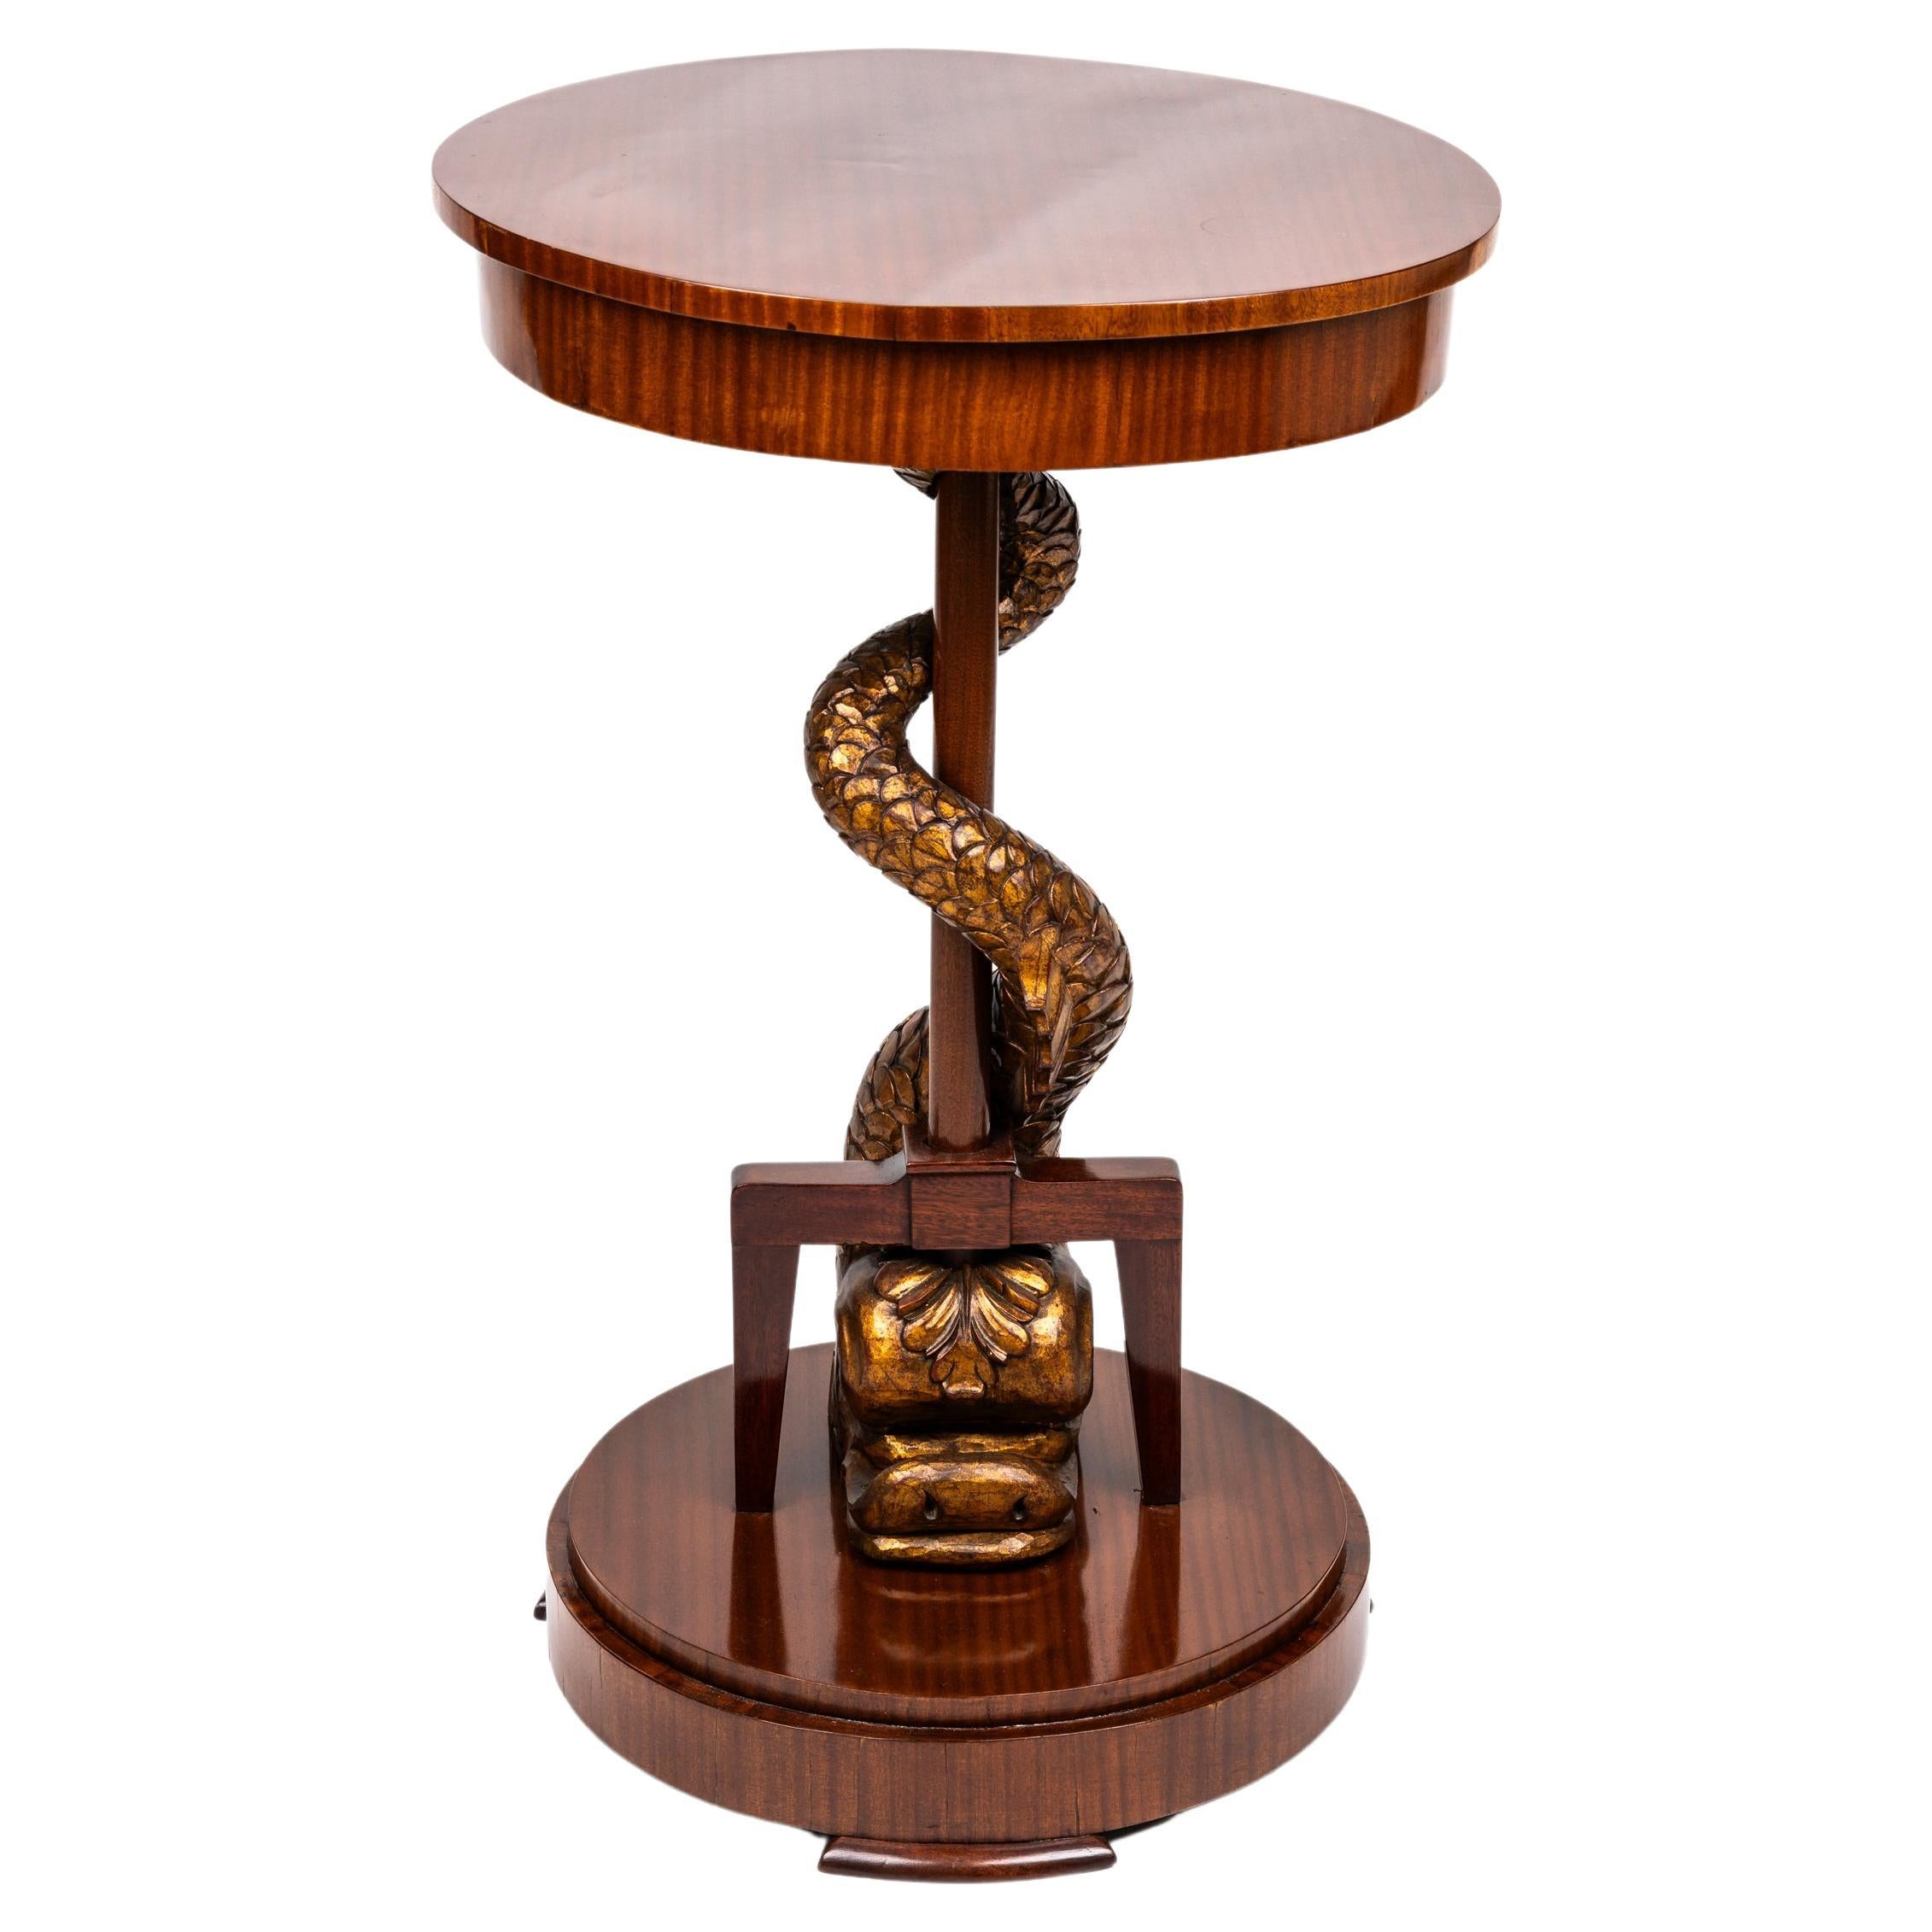 Stunning rare side table, so called Gueridon, from the second Empire, made around 1900 in Italy. 

This elaborate structure of the table is composed of a round base with small extensions as a detail, two columns between which a dolphin winds and a